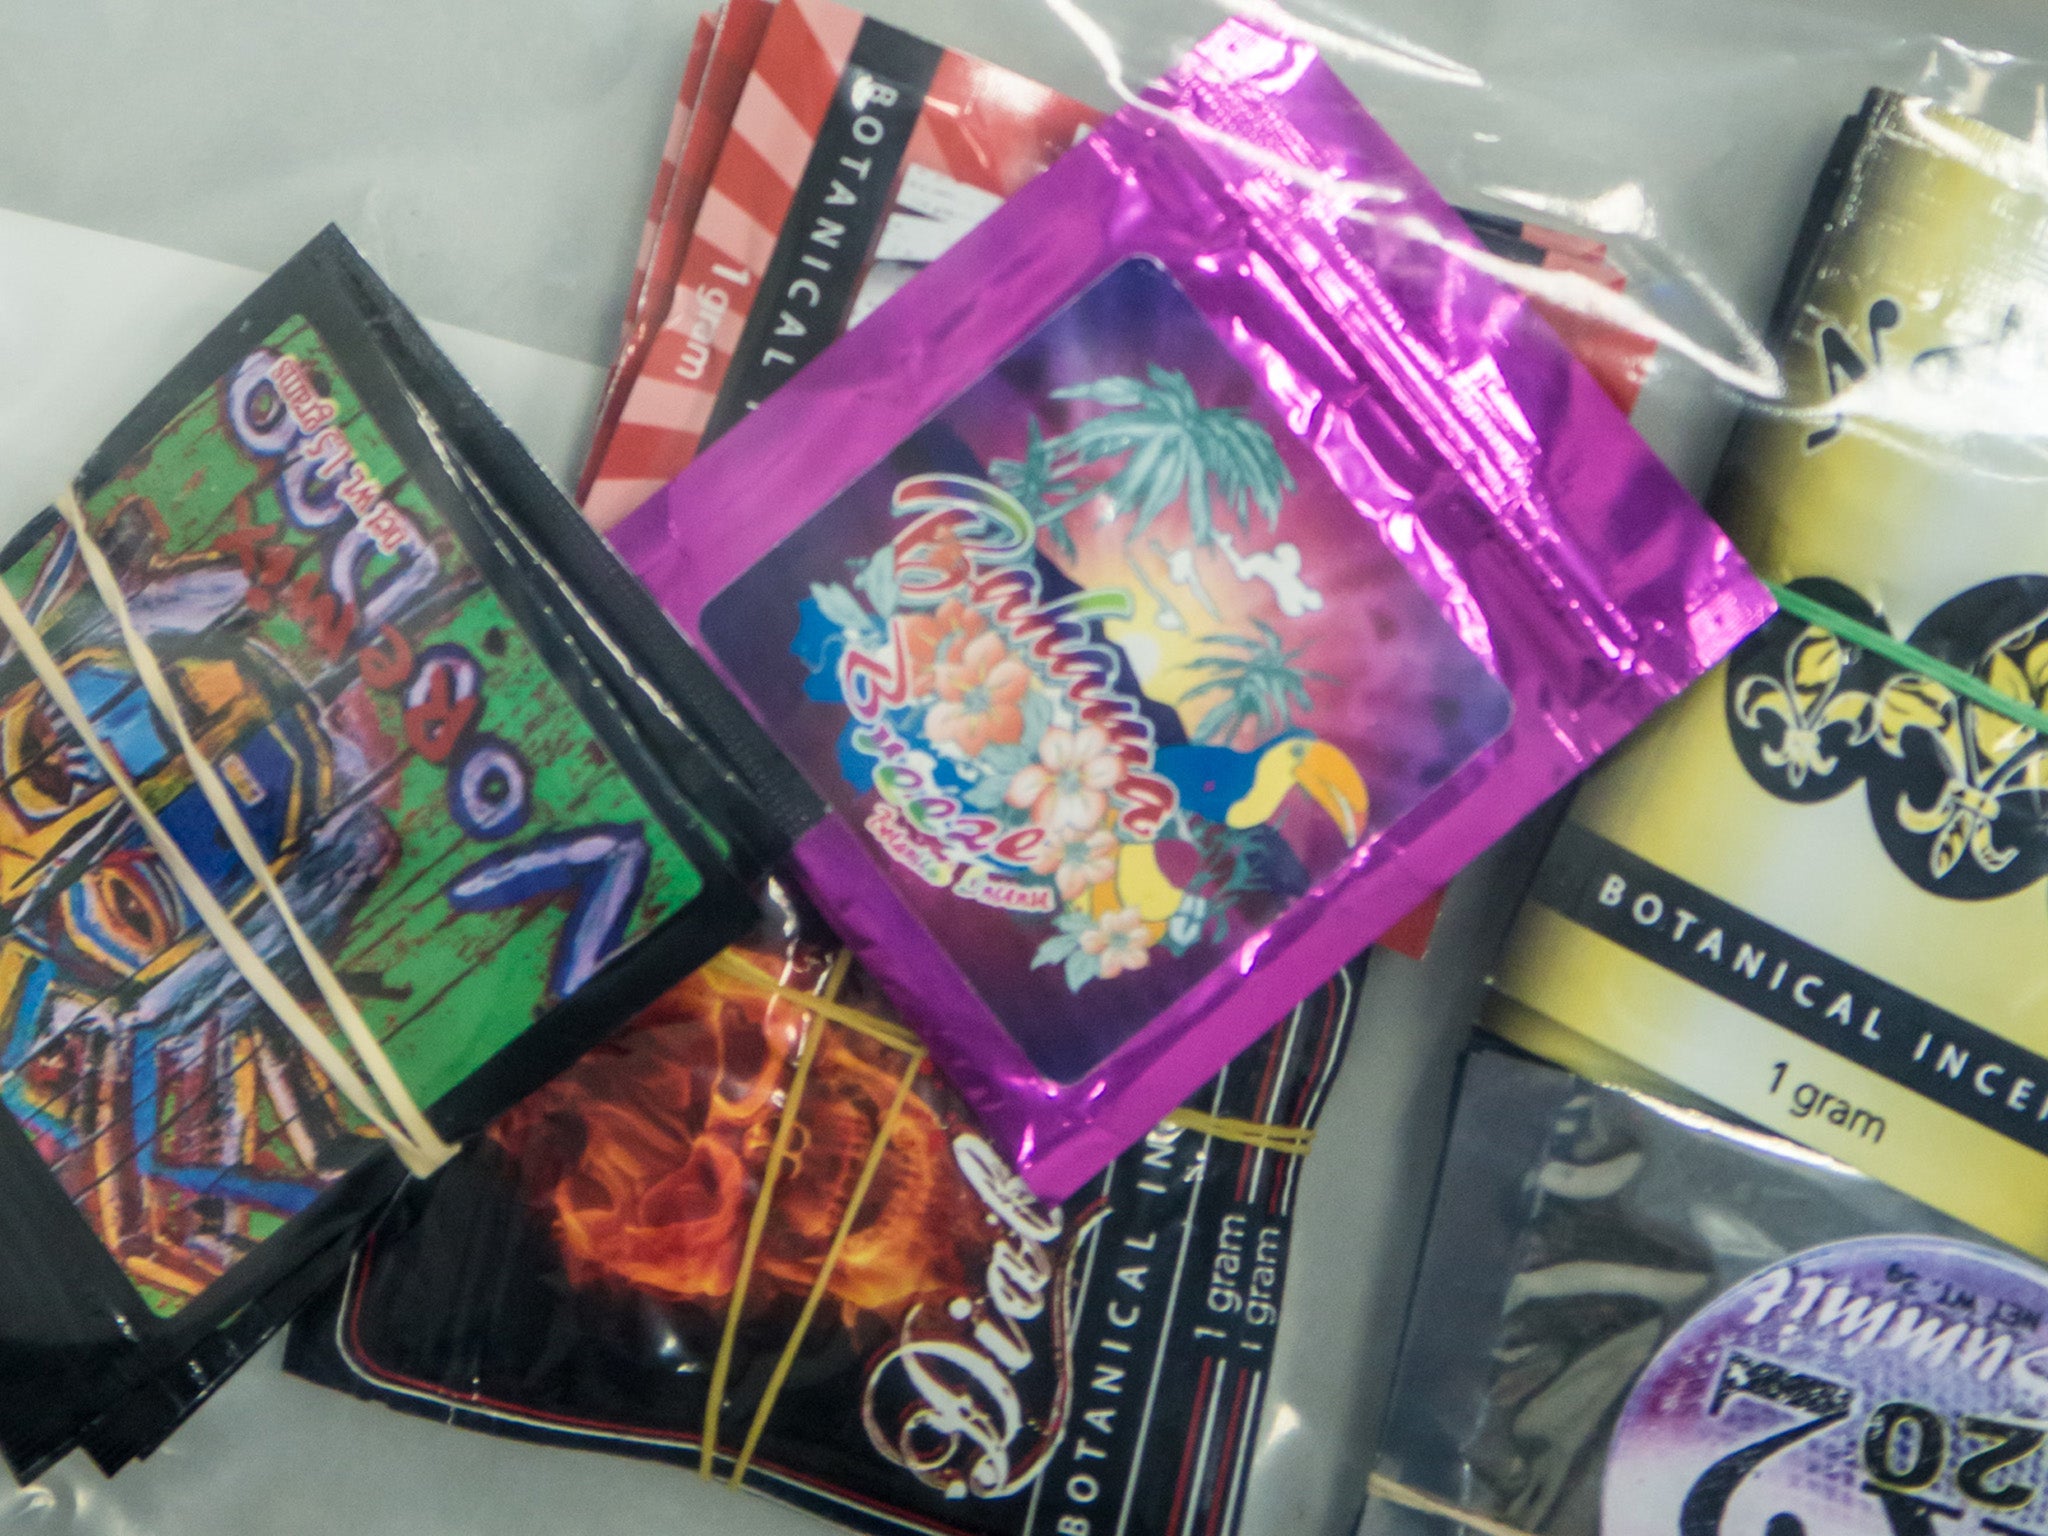 Five people have fallen ill after taking "legal highs" sold to them by the festival Parklife, police said